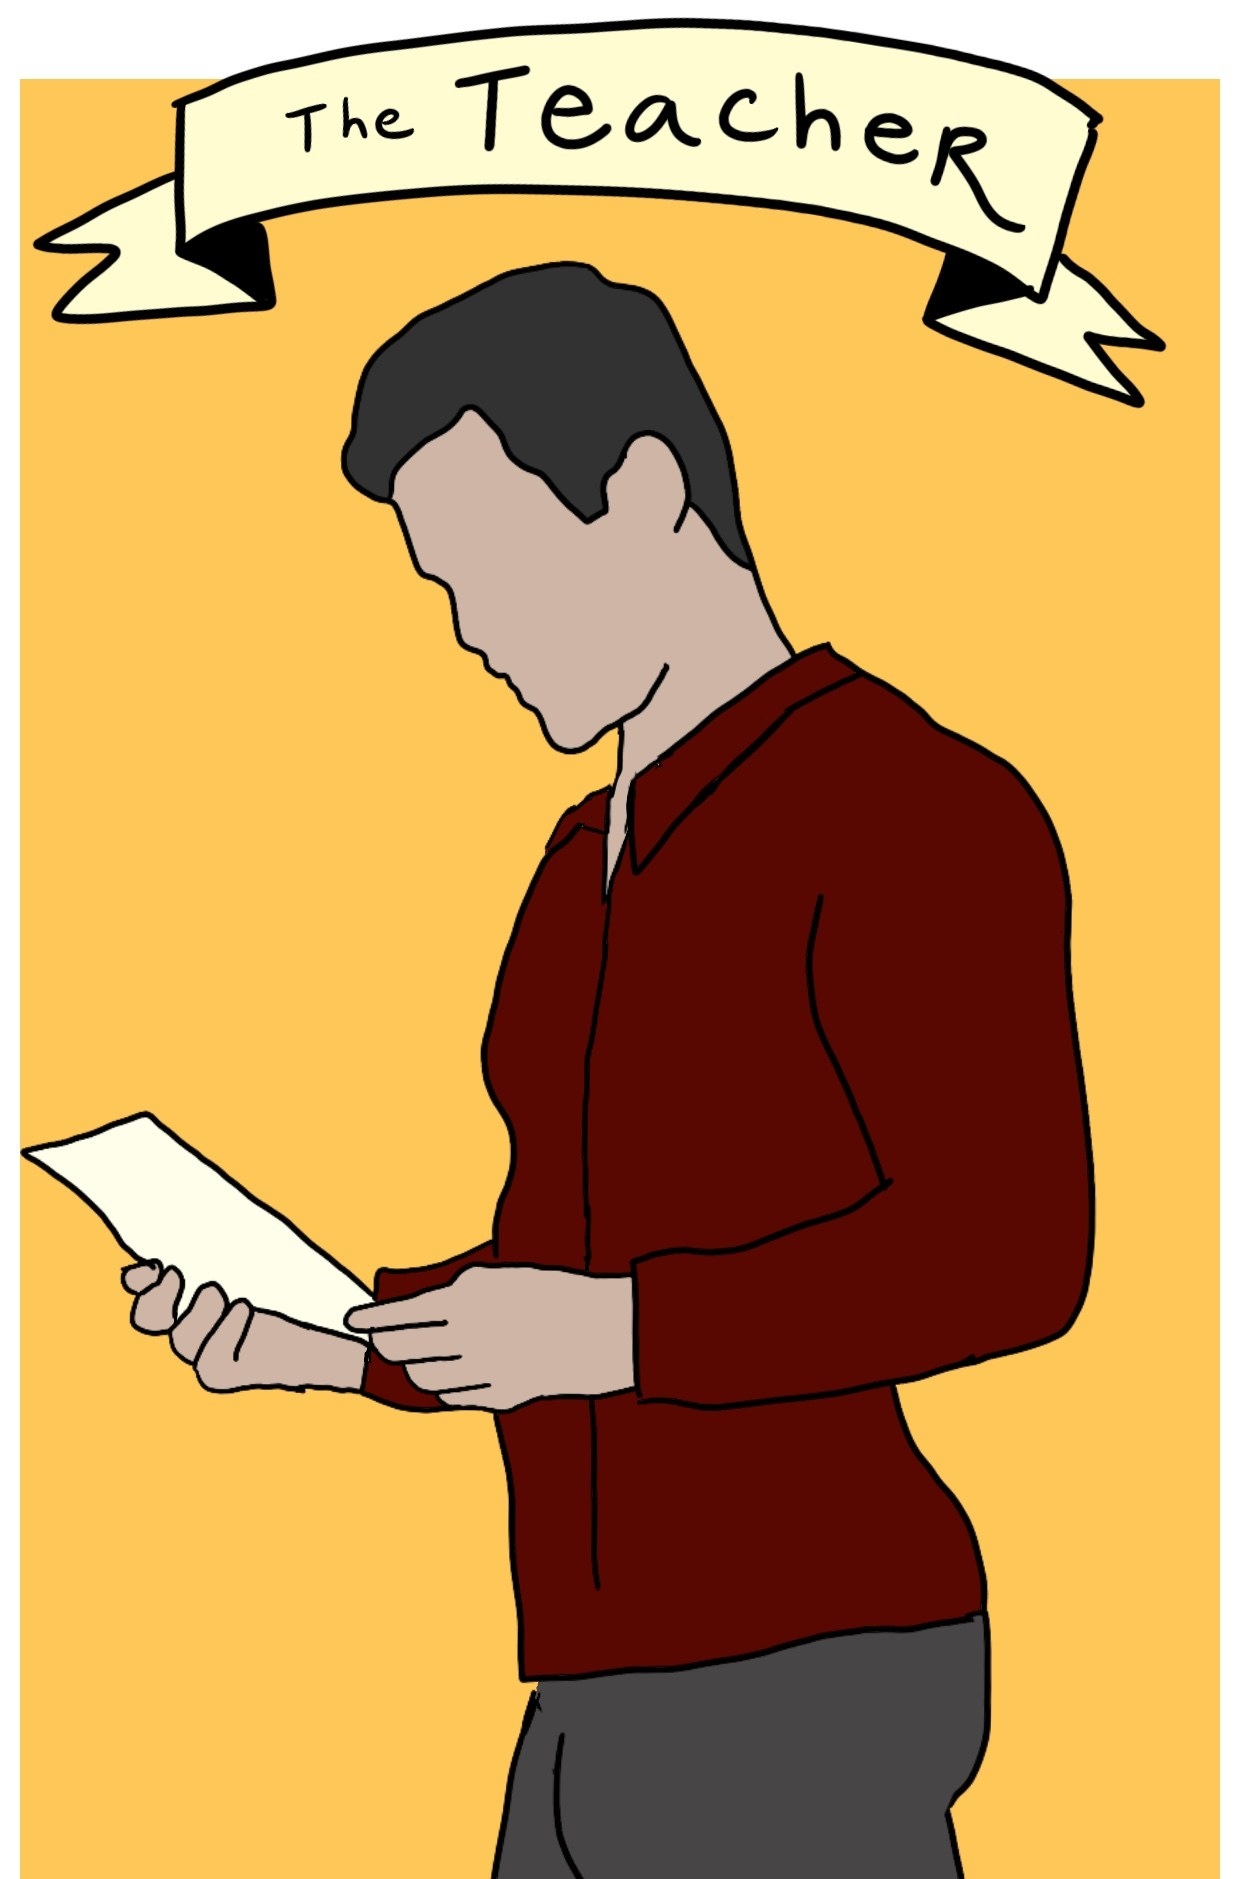 Drawing off a man in tight clothes holding a paper and reading it